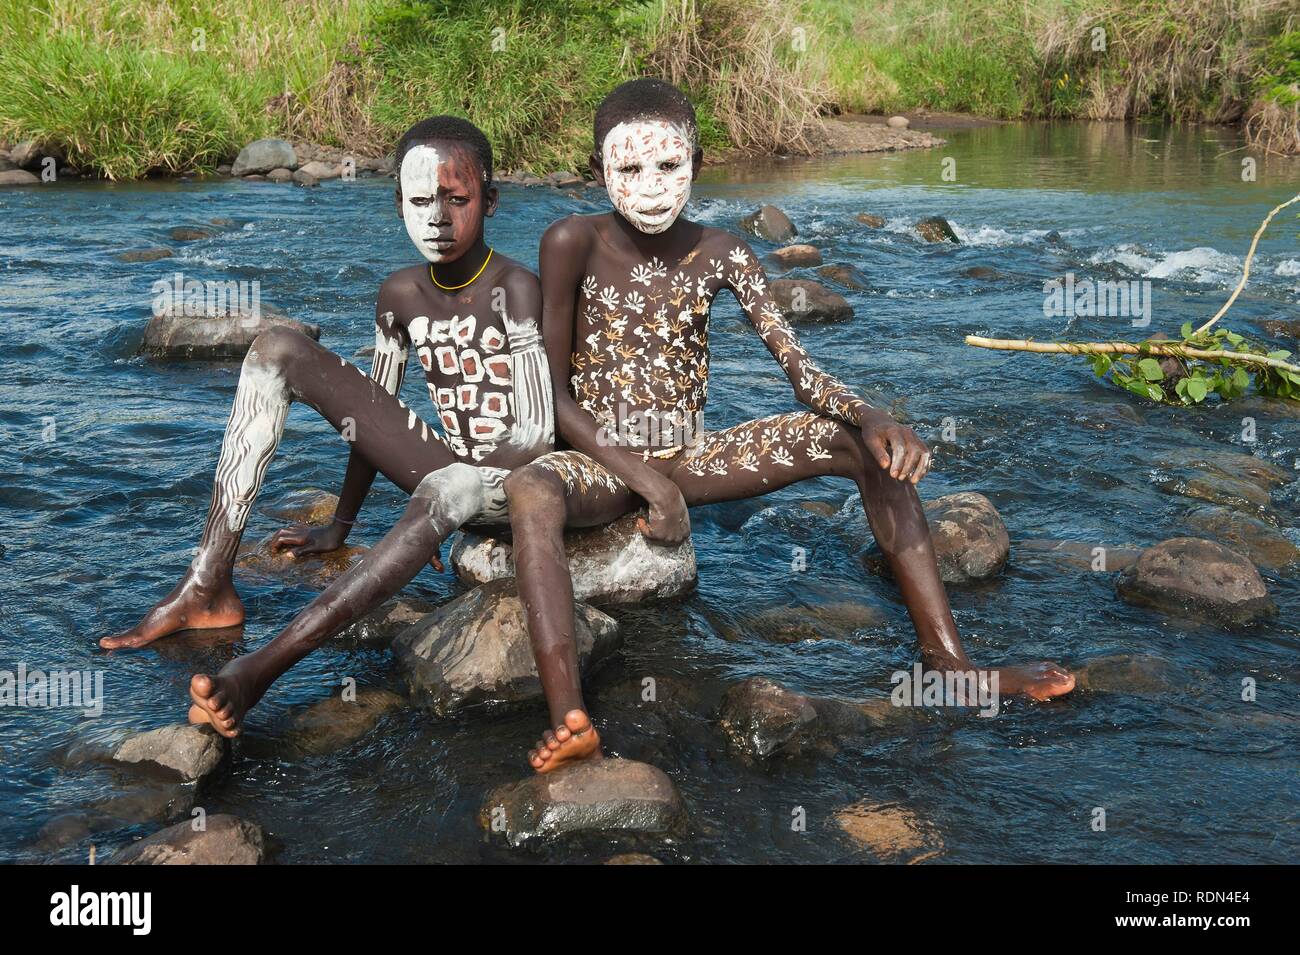 Two Surma boys with facial and body painting sitting on a rock in the river, Kibish, Omo River Valley, Ethiopia, Africa Stock Photo